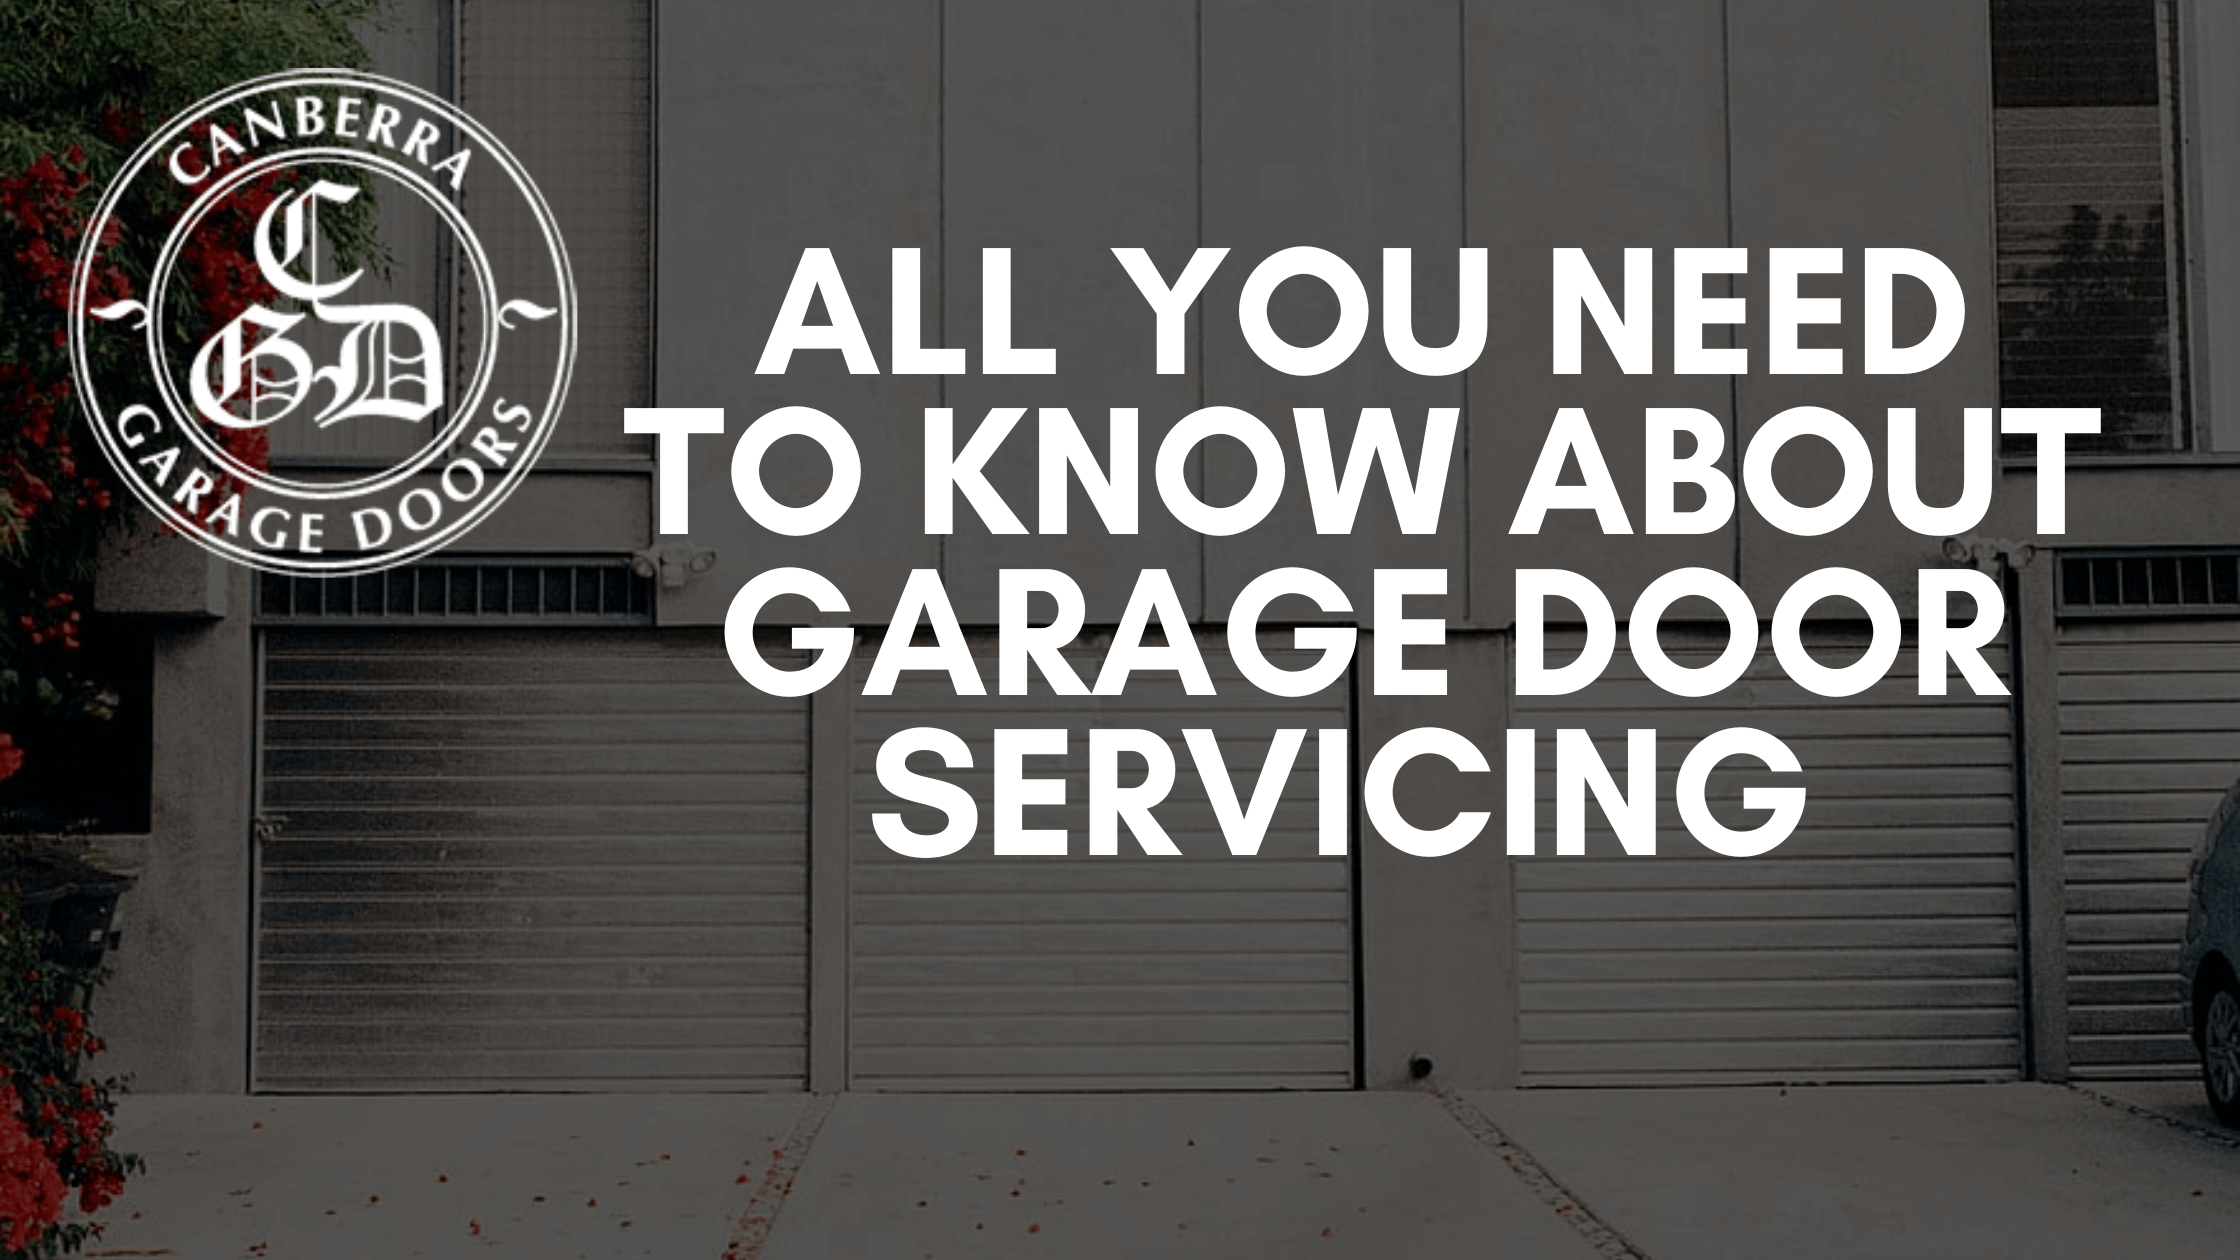 All You Need to know About Garage Door Servicing  (1)-d5bae106